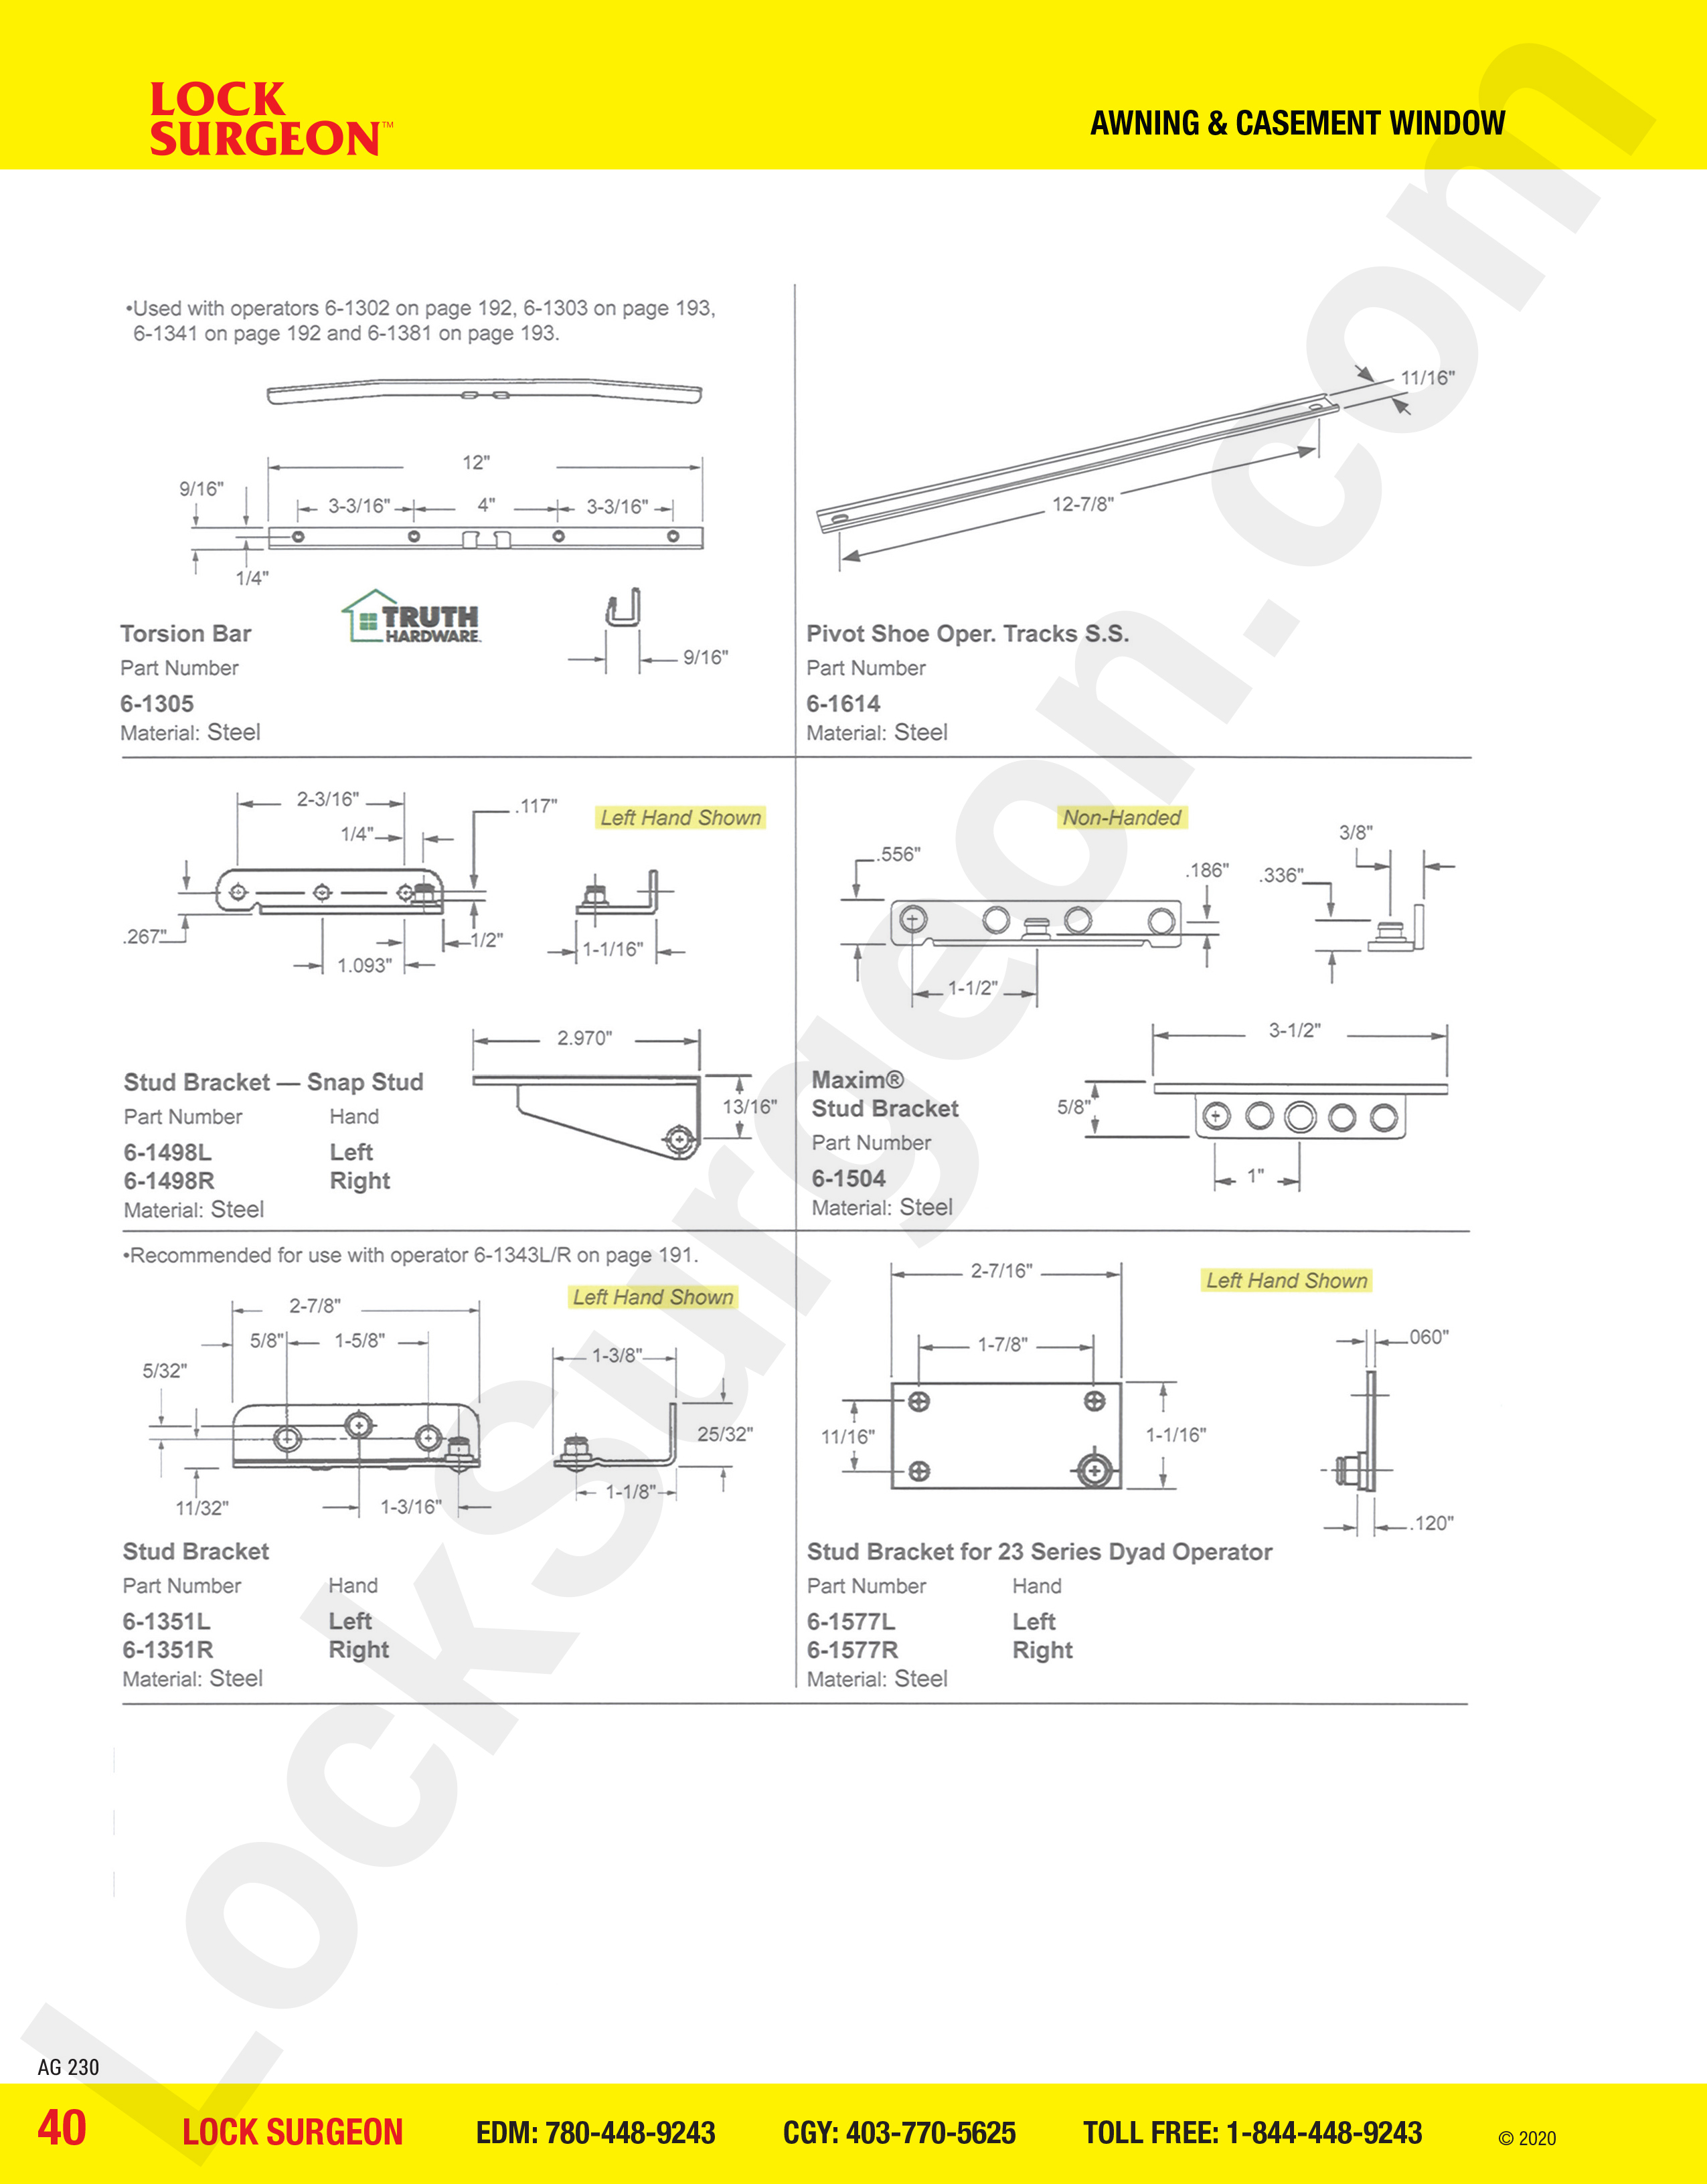 awning and casement window parts for stud brackets